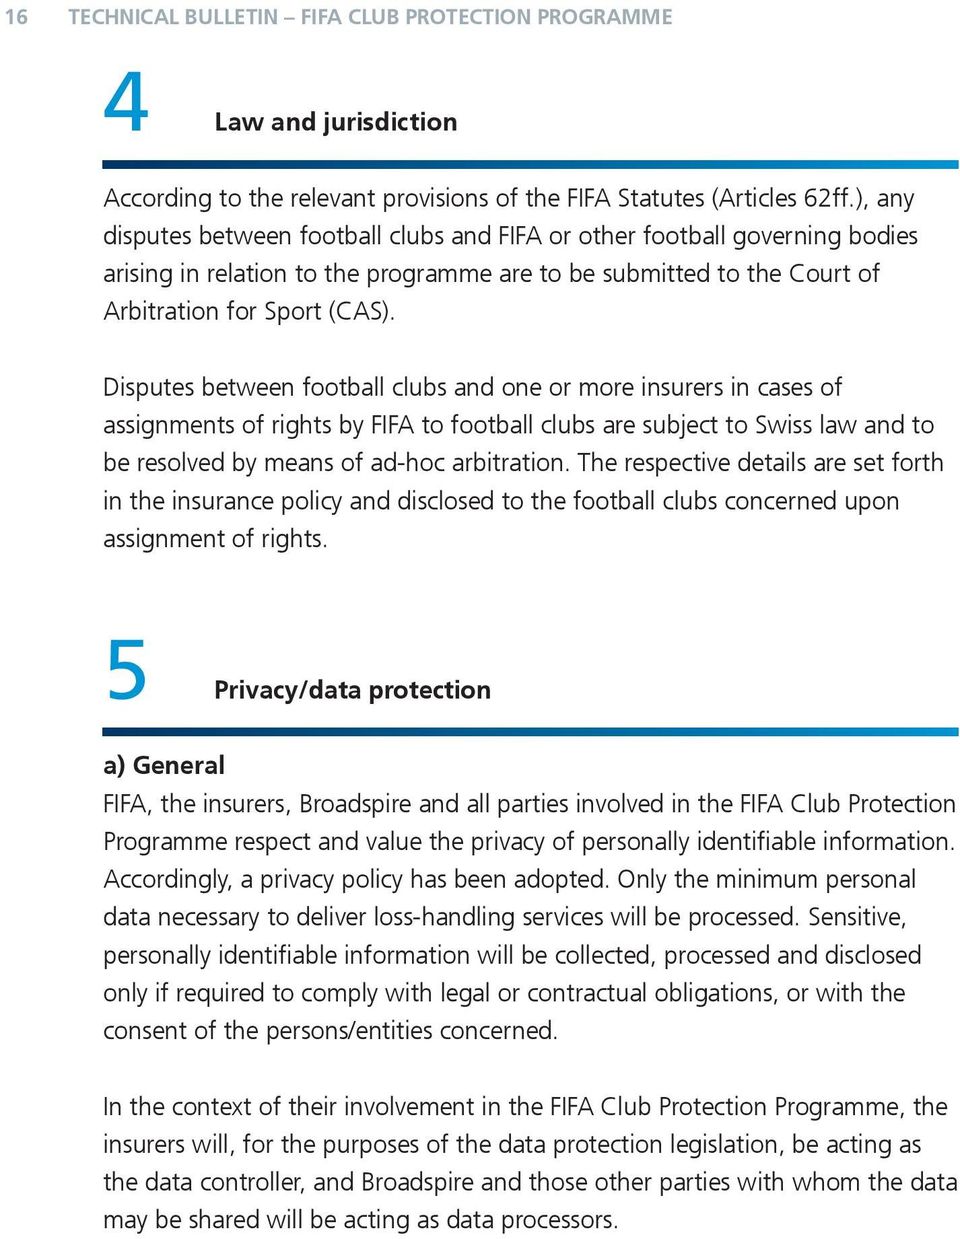 Disputes between football clubs one or more insurers in cases assignments rights by FIFA to football clubs are subject to Swiss law to be resolved by means ad-hoc arbitration.